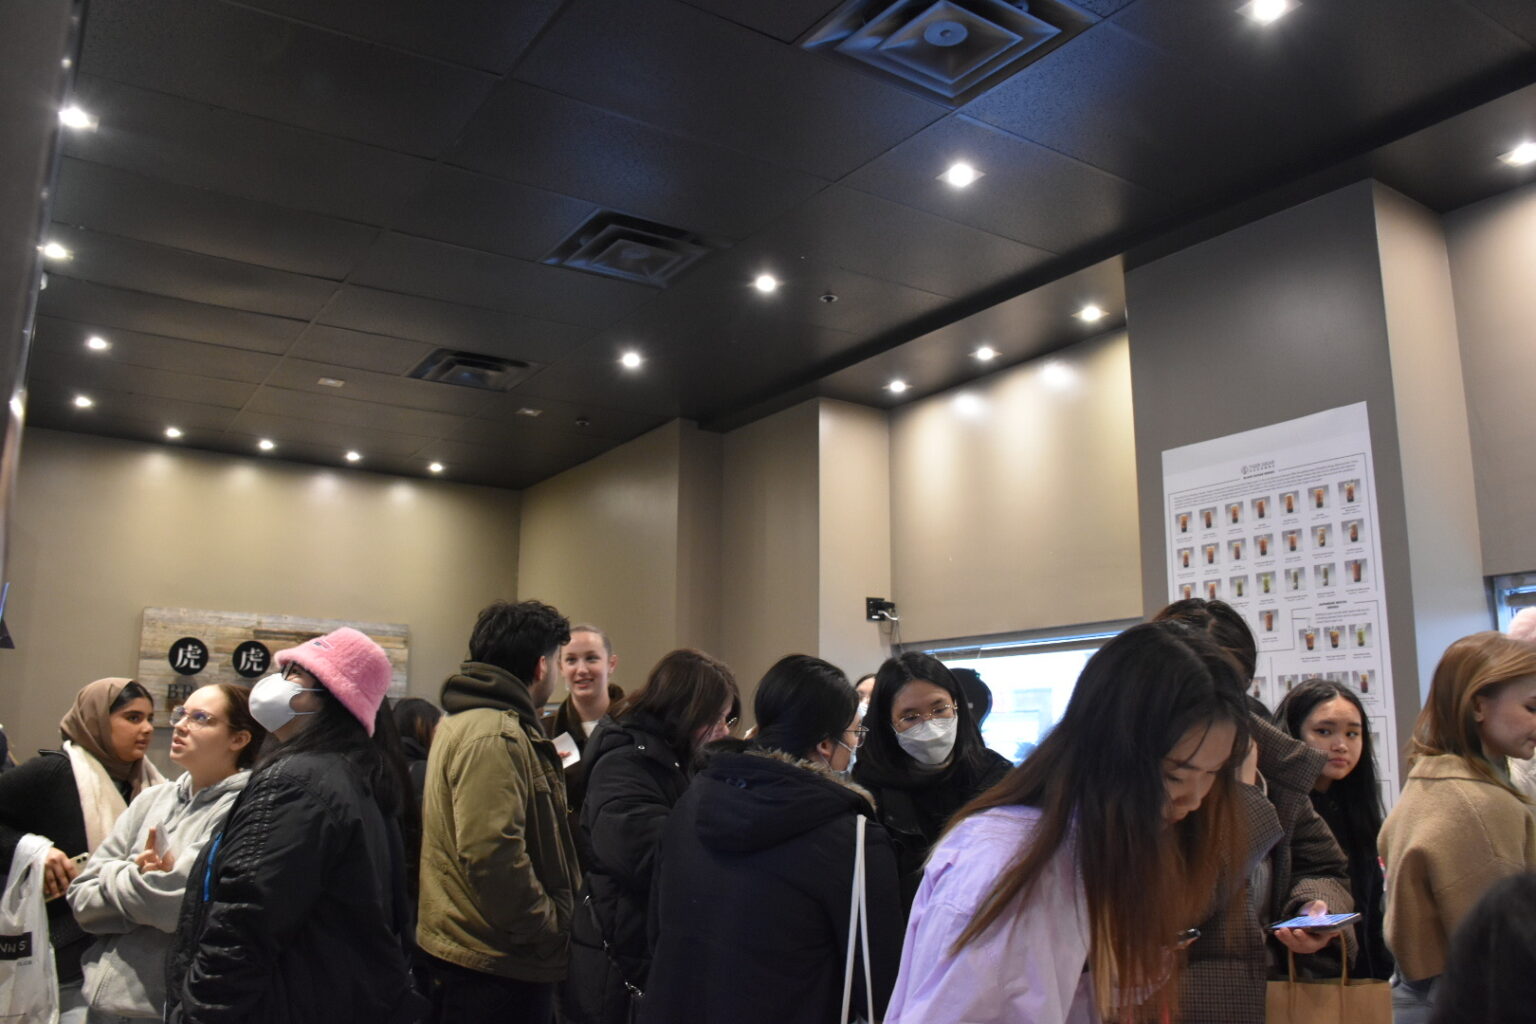 K-pop fans crowd the interior of a local bubble shop to converse with local vendors and purchase bubble tea drinks